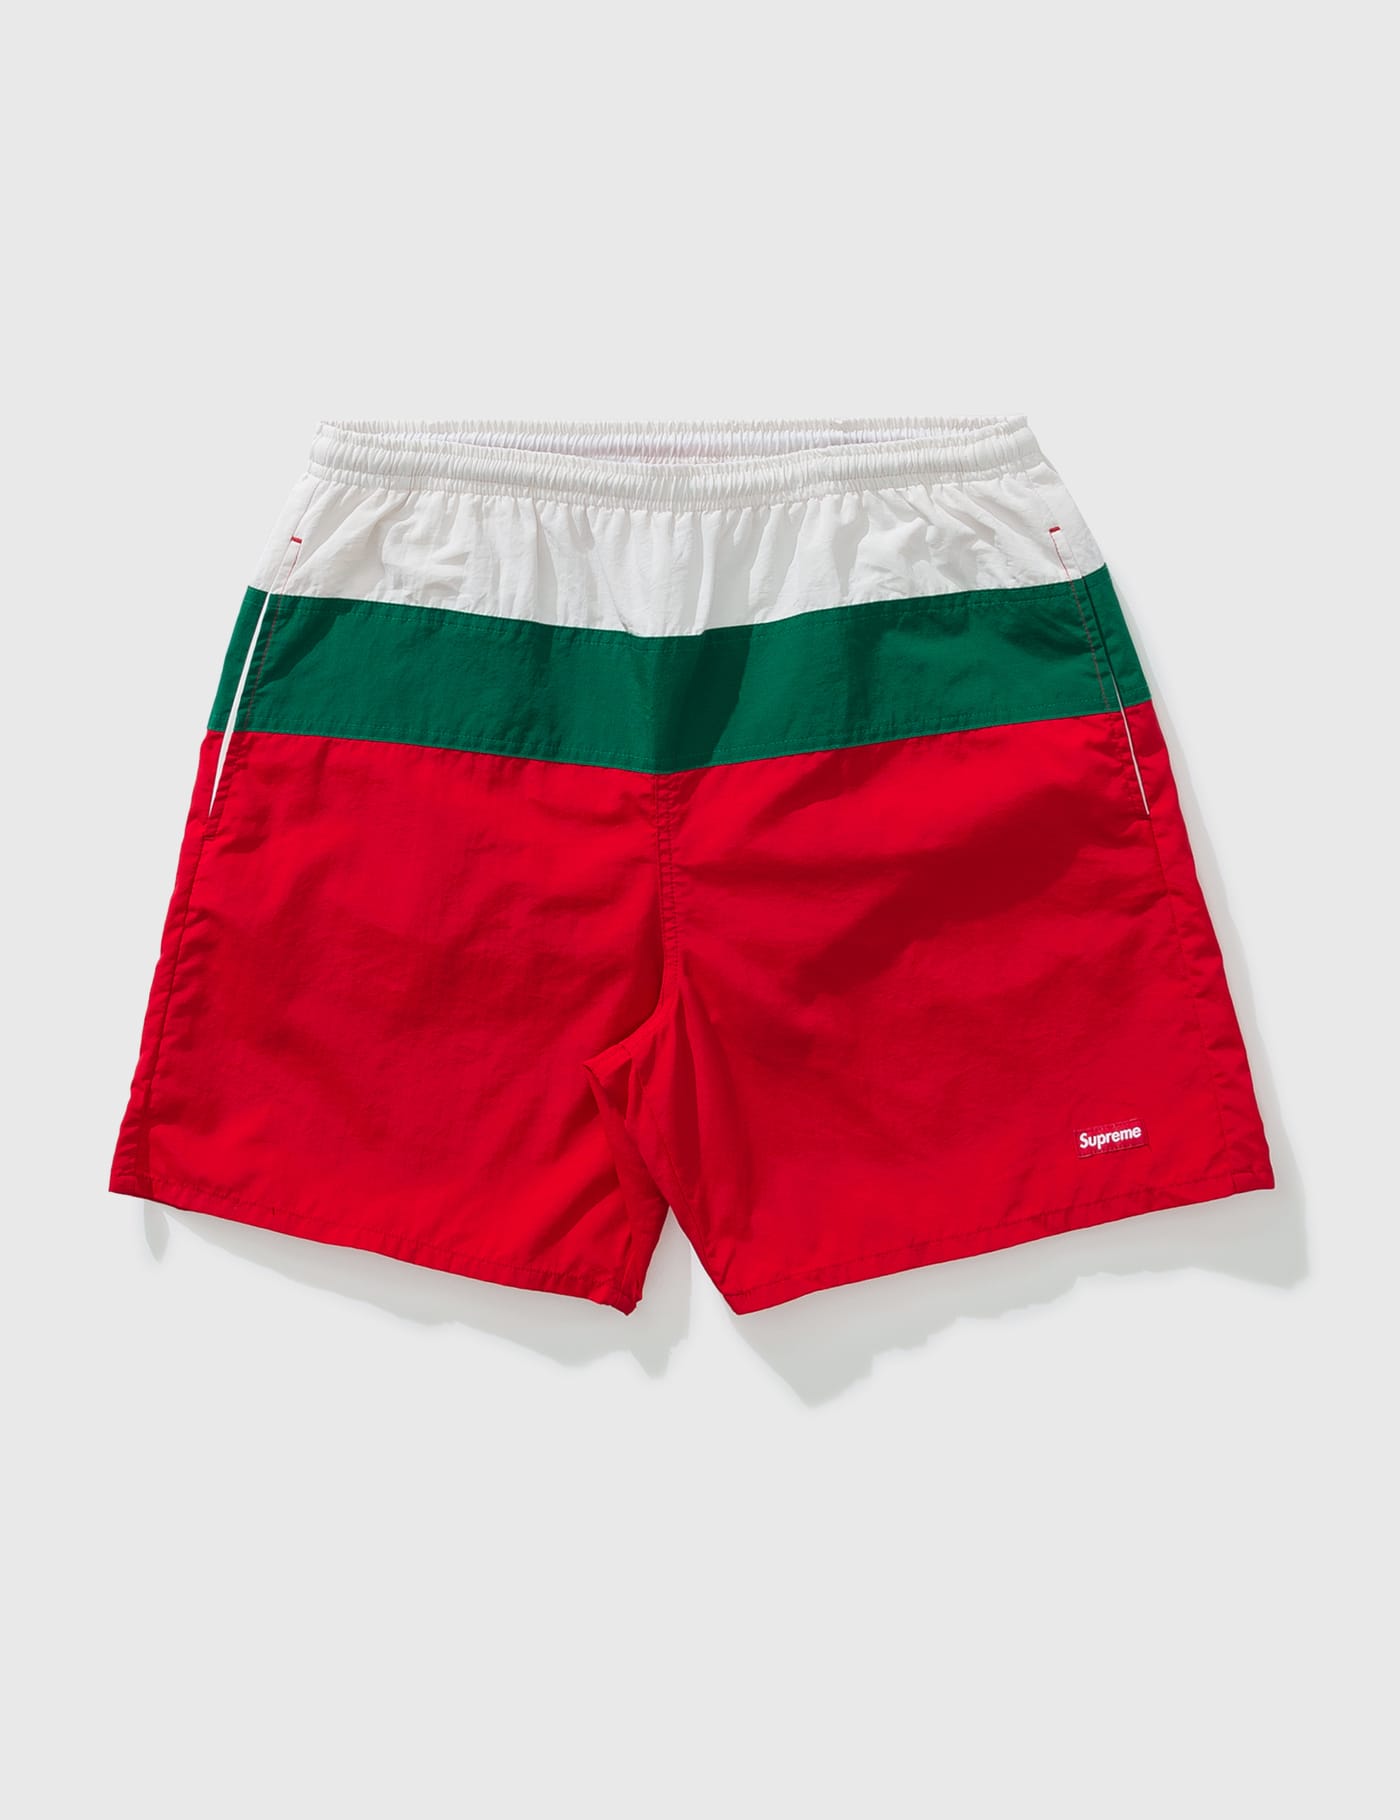 Supreme - Supreme Shorts | HBX - Globally Curated Fashion and 